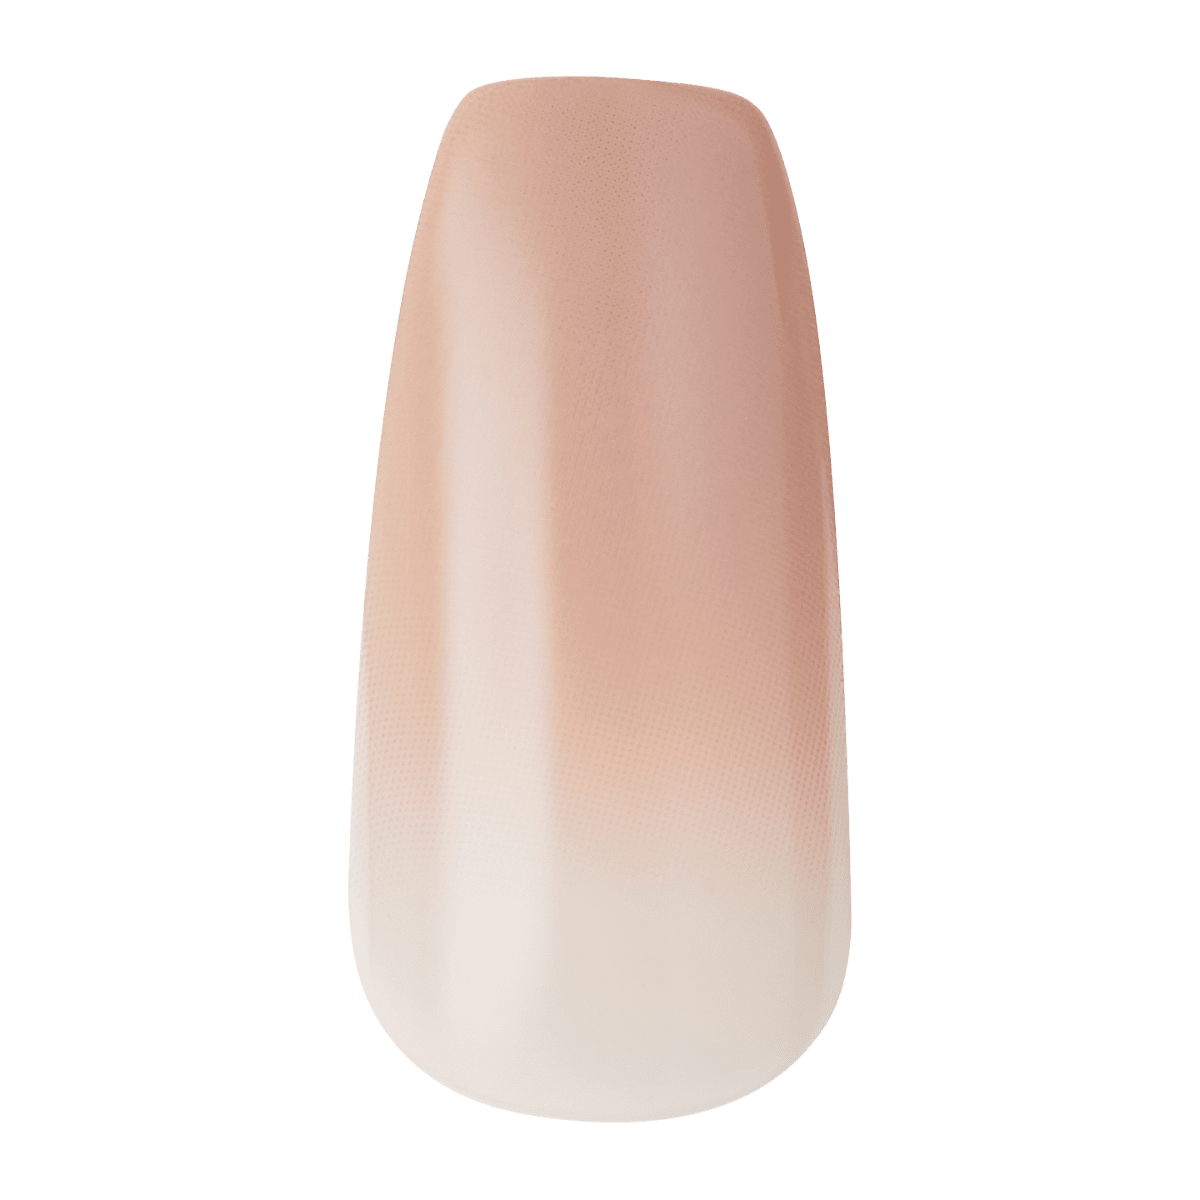 KISS Glam Fantasy, Press-On Nails, Hard To Forget, Beige, Long Coffin, 28ct